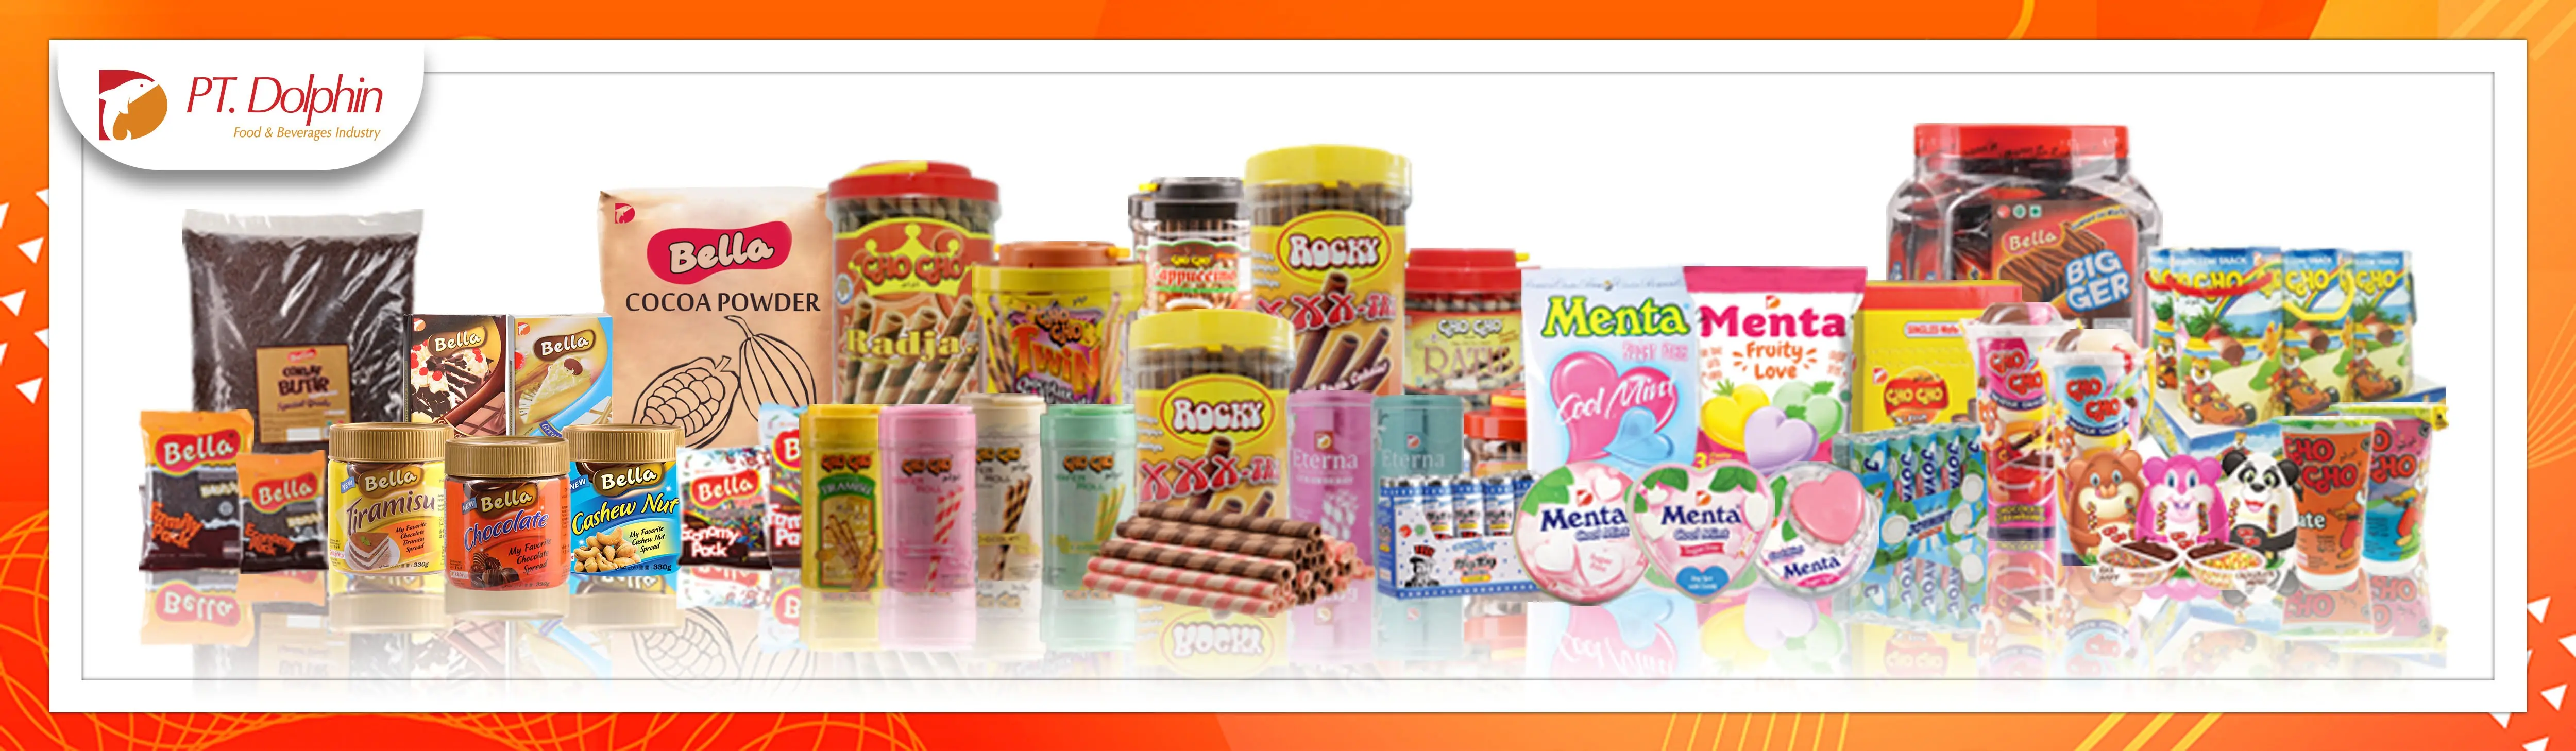 PT. DOLPHIN FOOD & BEVERAGES INDUSTRY - Chocolate, Snack